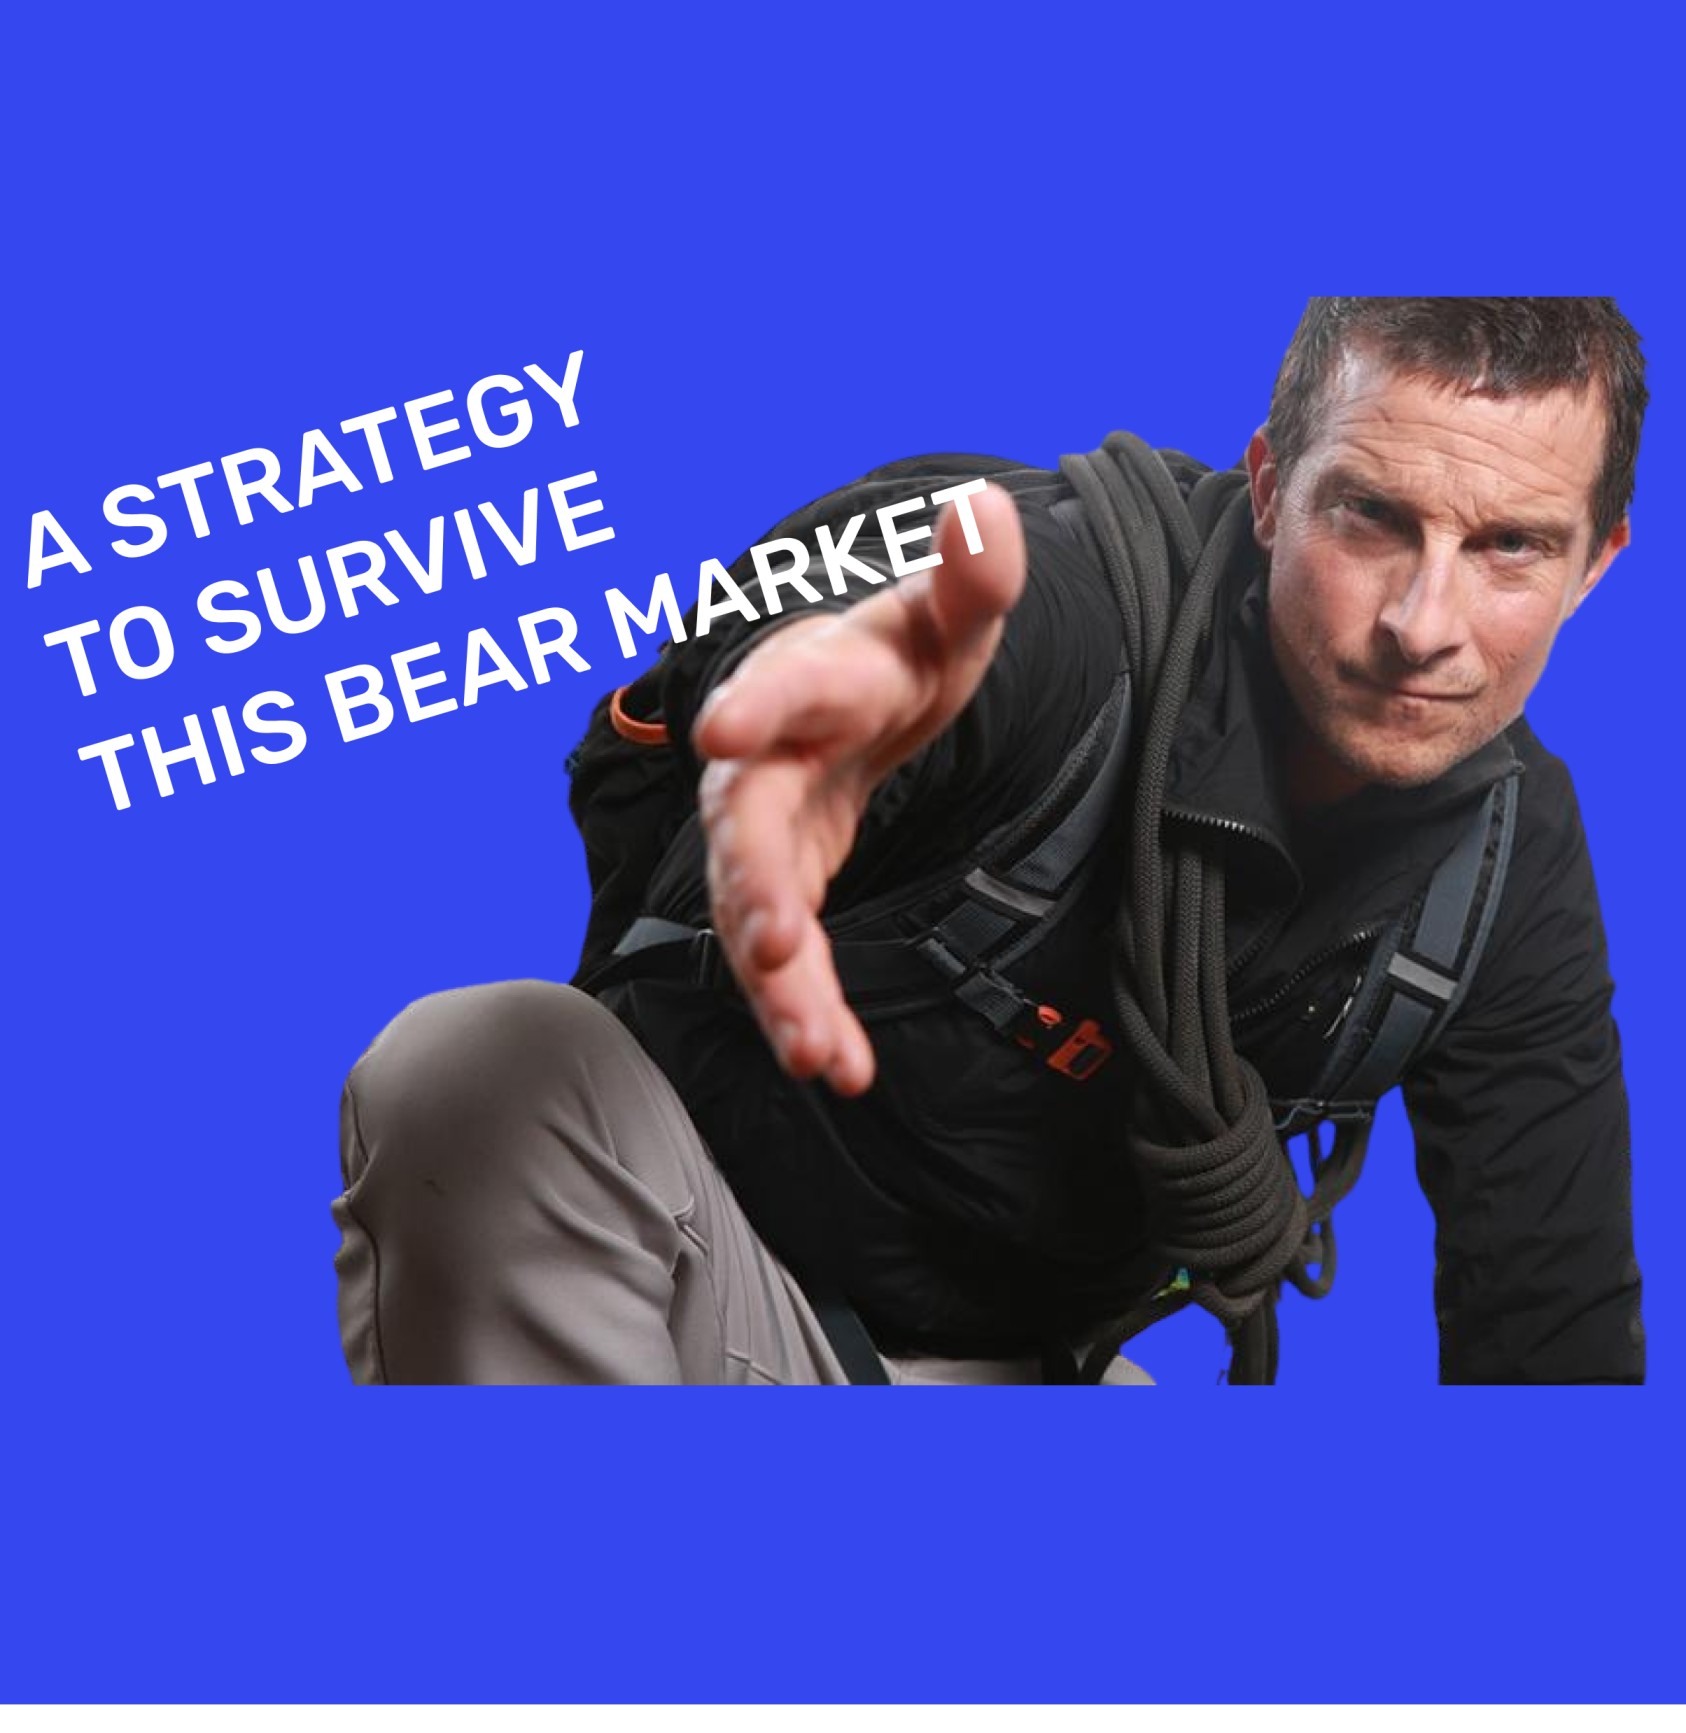 Bear Grylls reaching out, helping you survive markets.